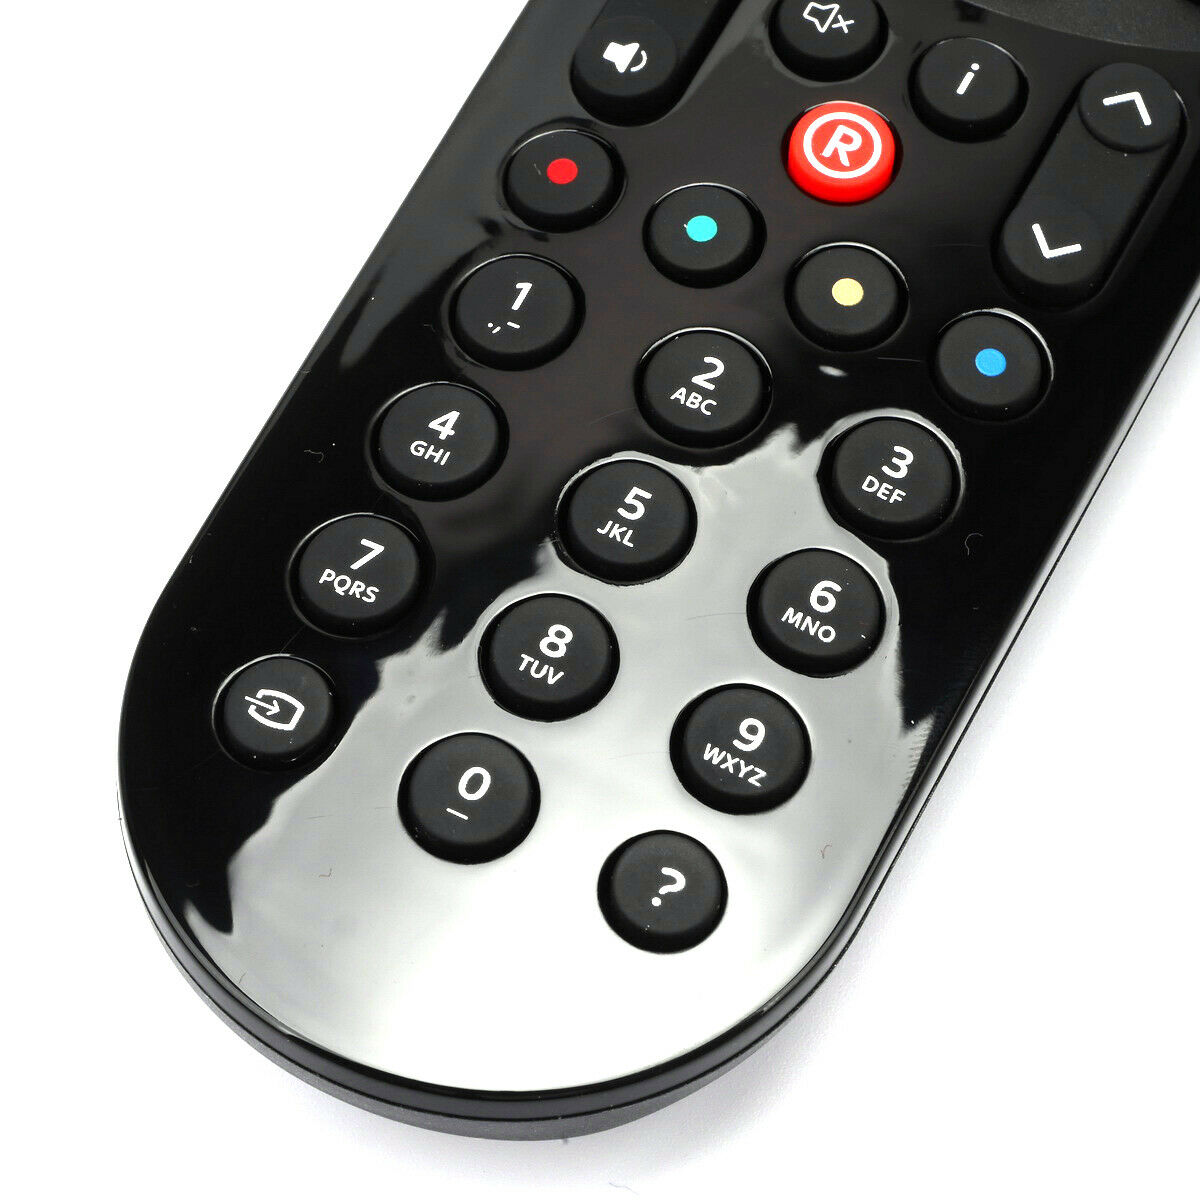 E57065-Universal-Replacement-Infrared-Remote-Control-For-Sky-Q-Version-2-TV-Box-1671331-9